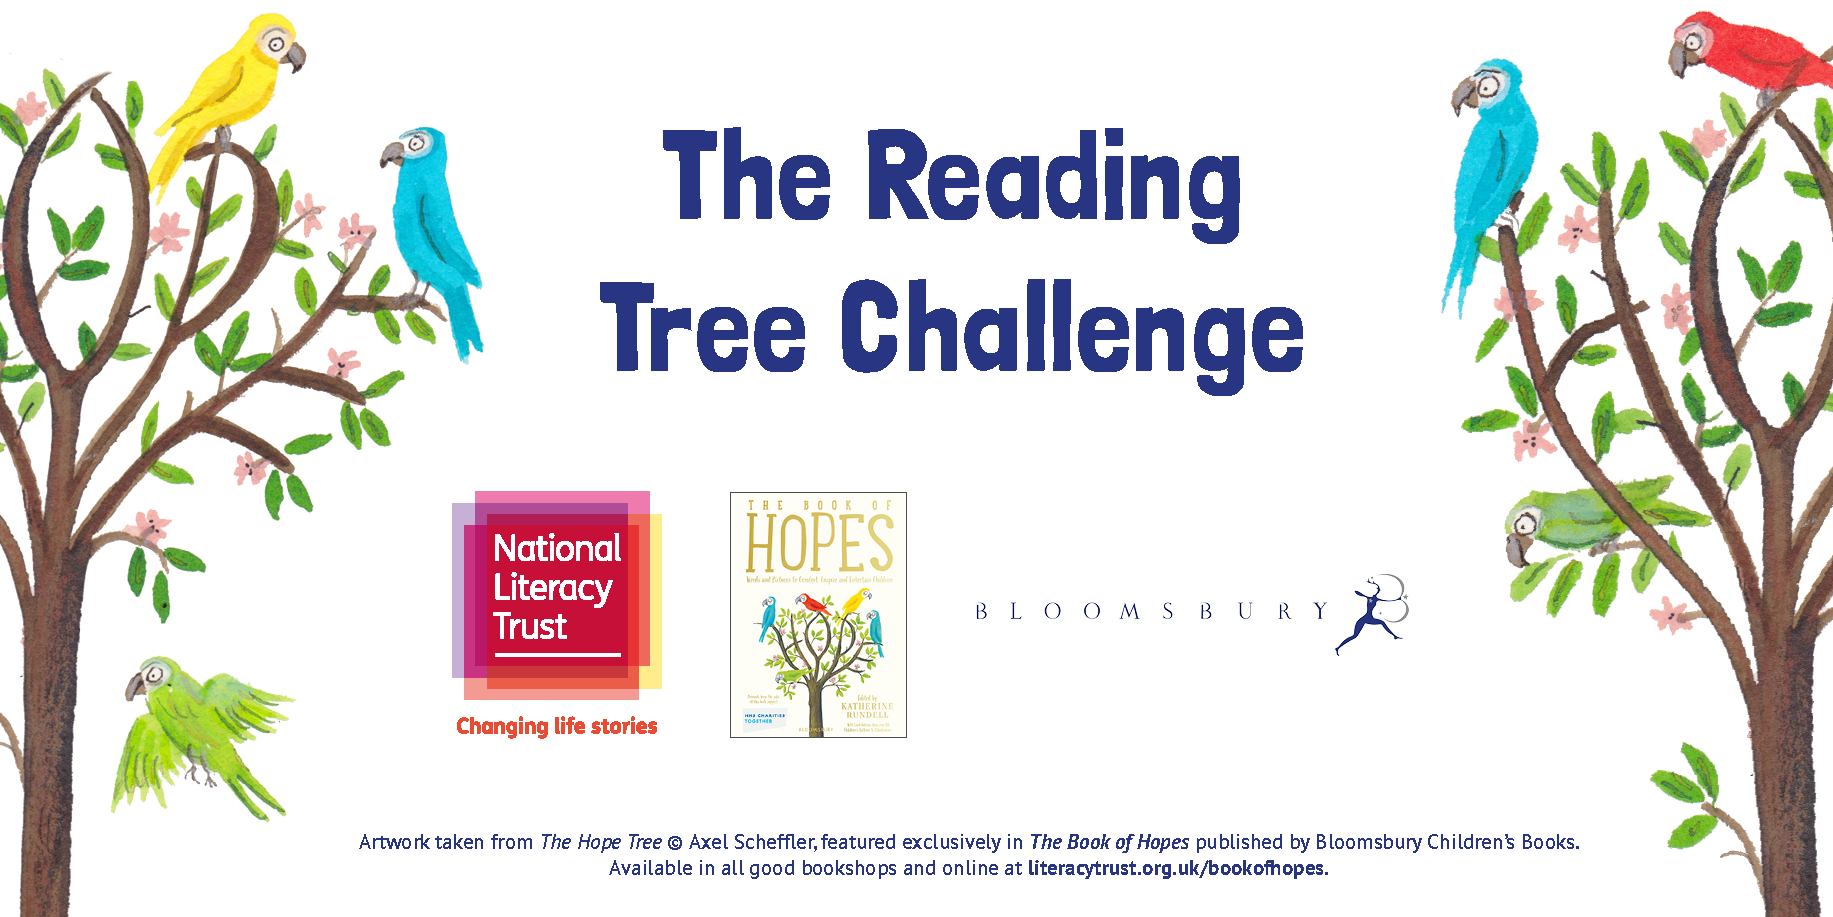 The Reading Tree Challenge.png